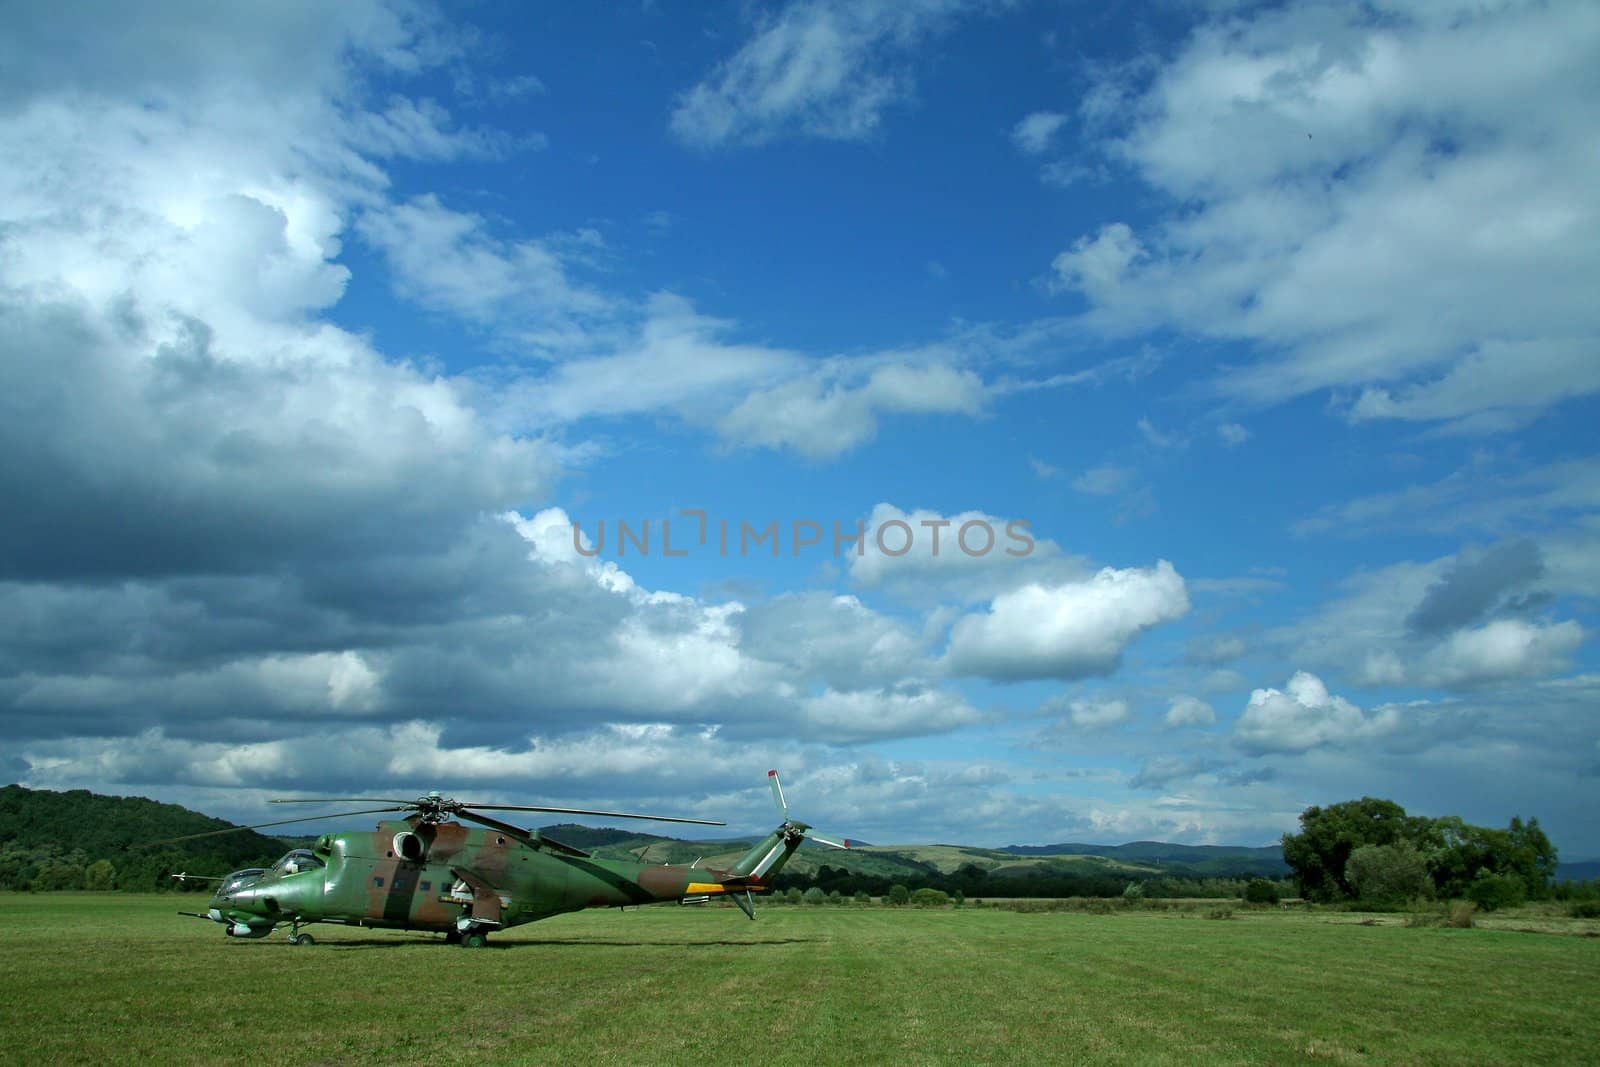 military helicopter on grass ground, cloudy sky